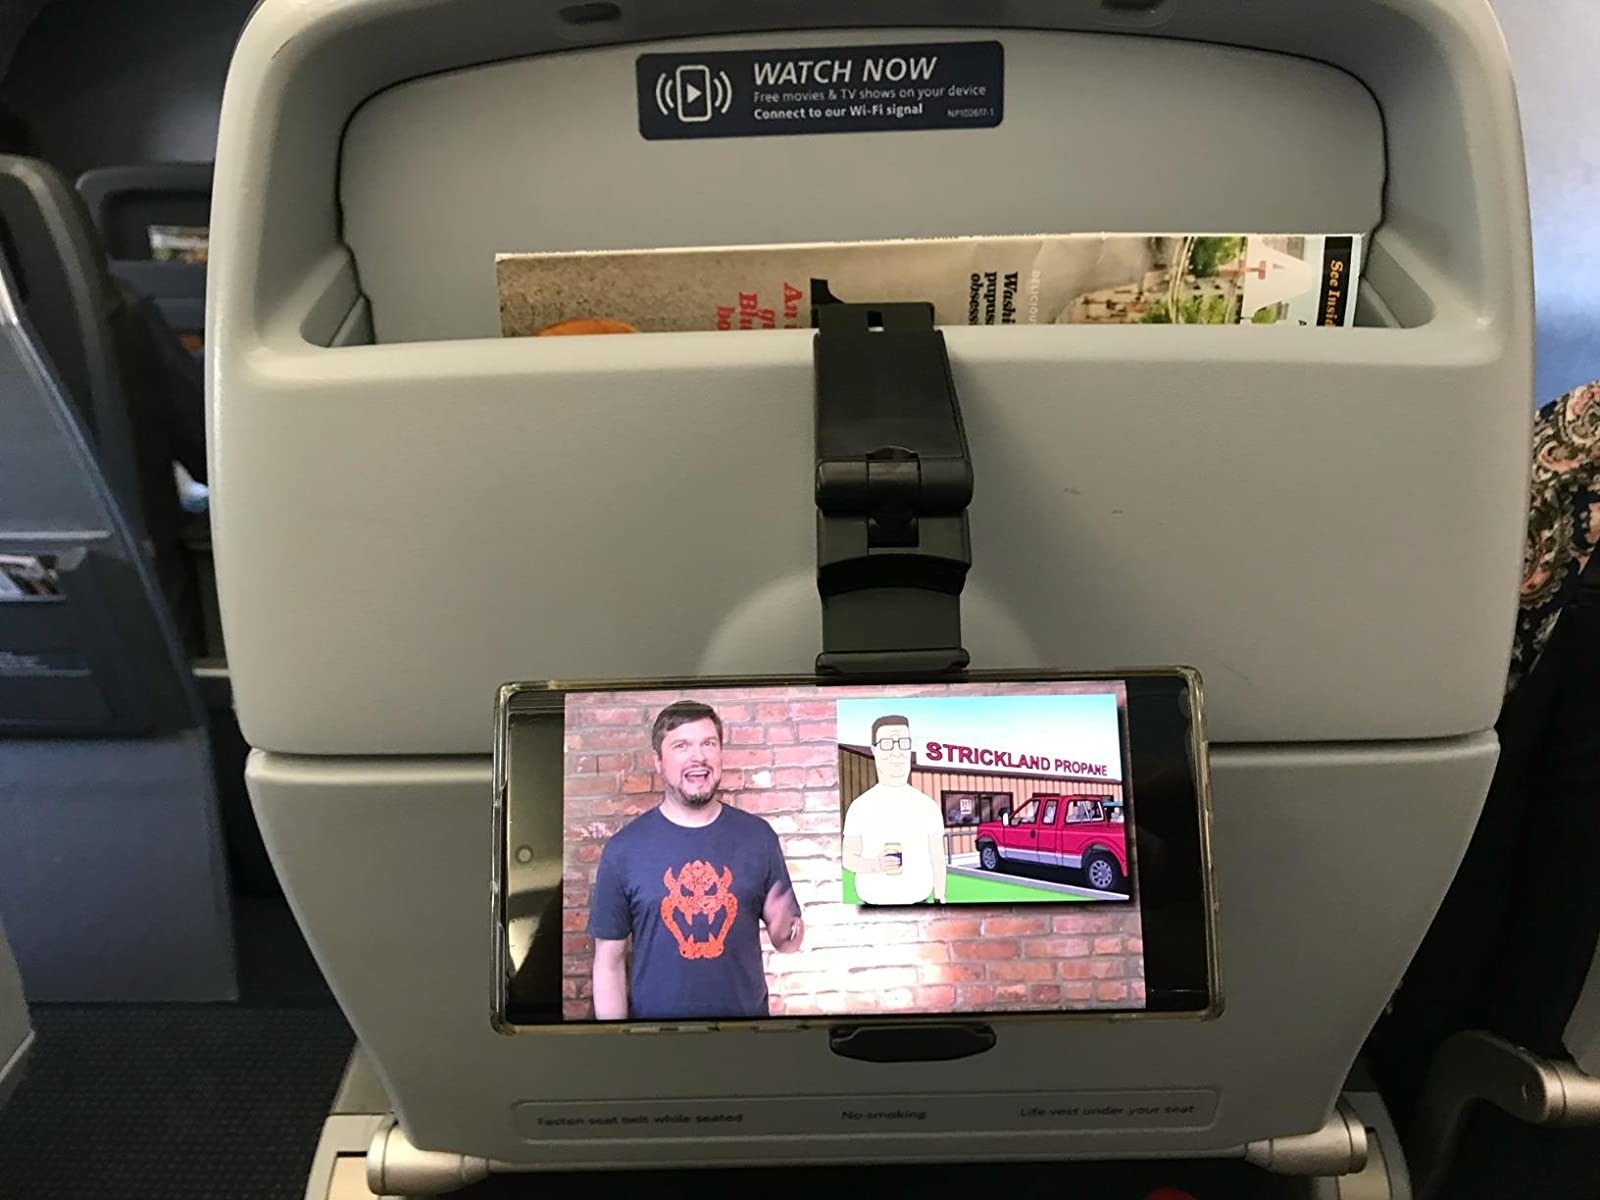 Reviewer placed the mount on the seat in front on an airplane, and watching a show on their phone